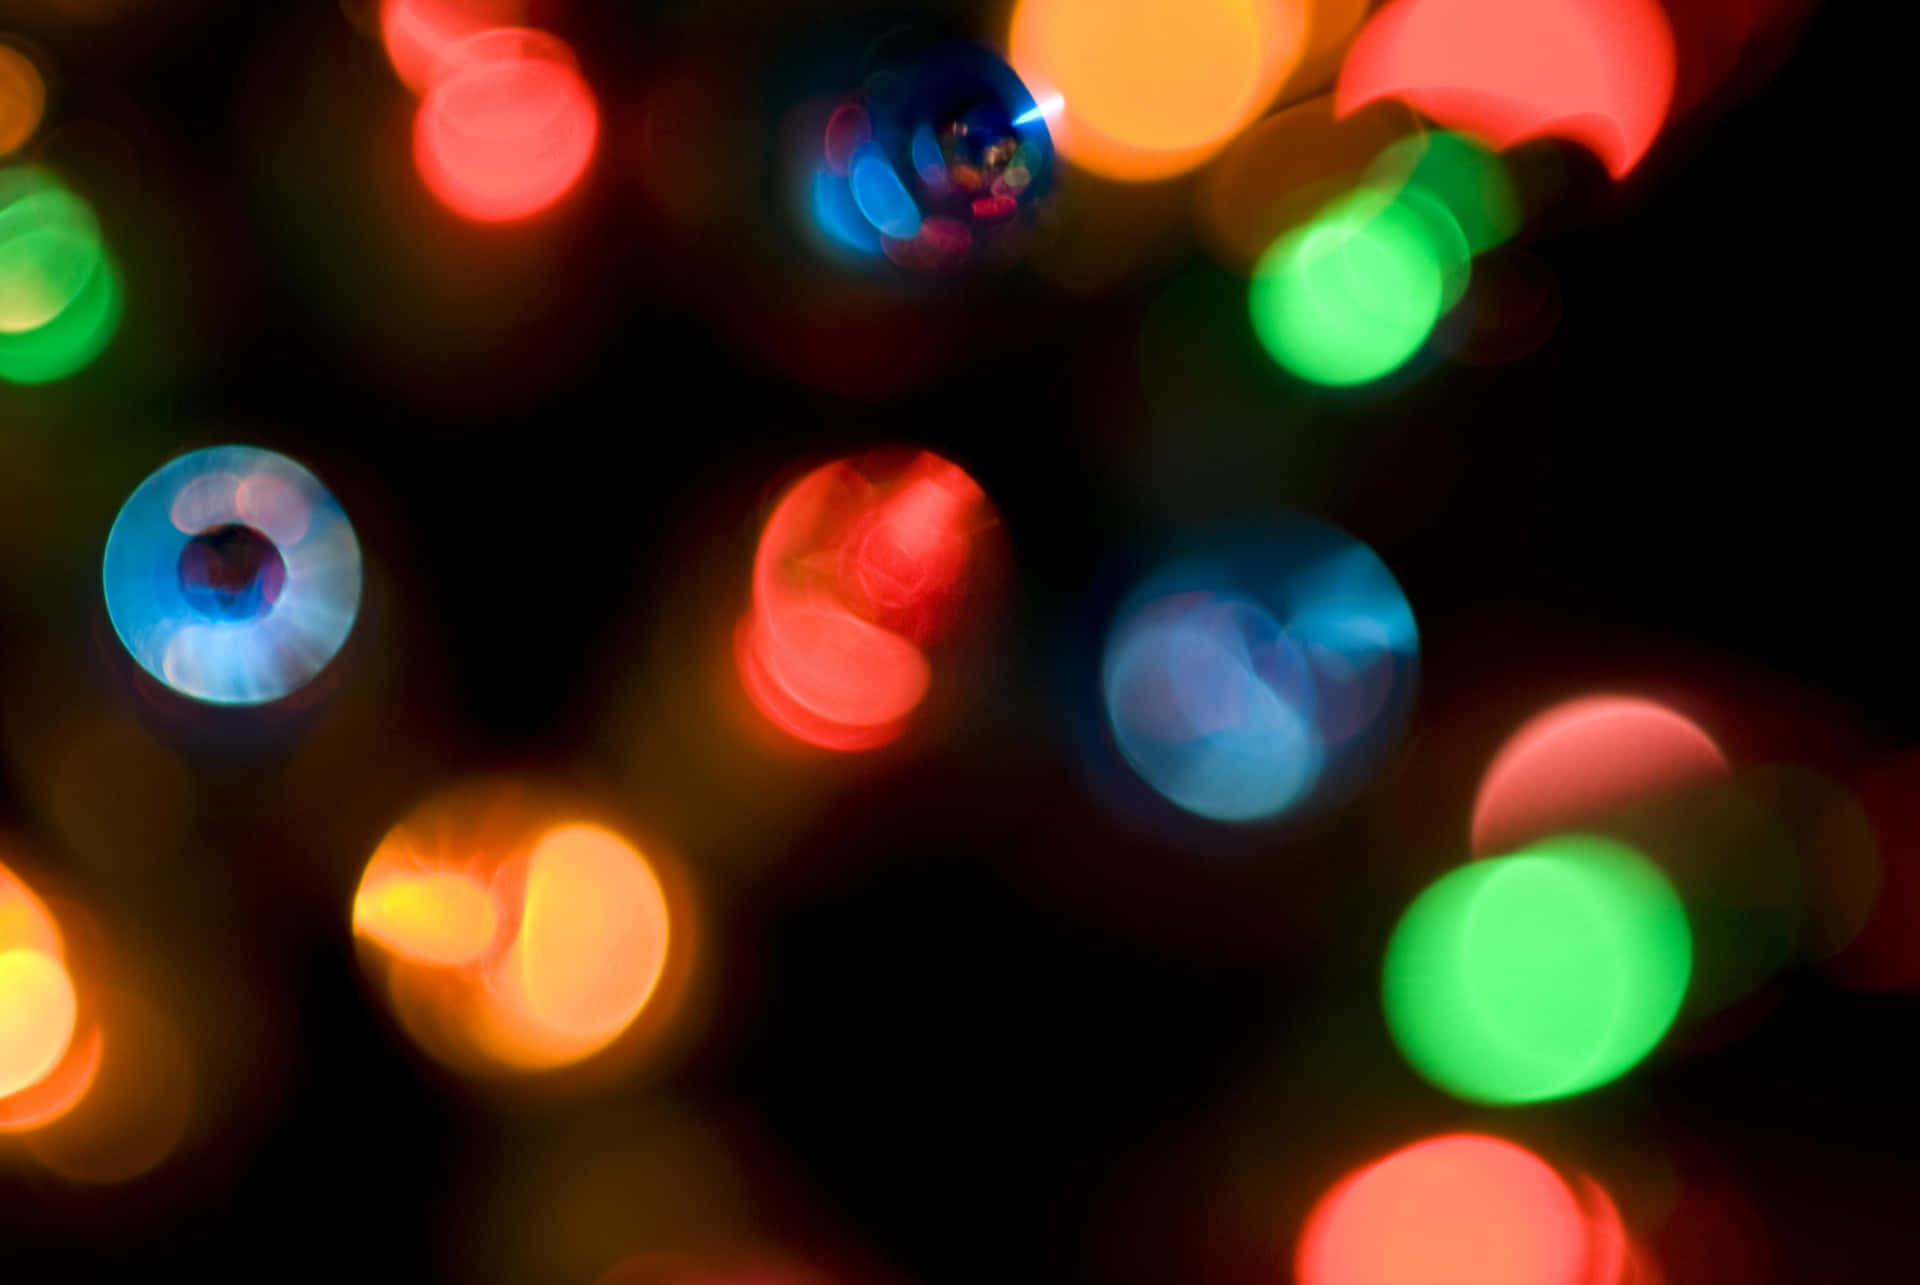 A Blurry Image Of Lights